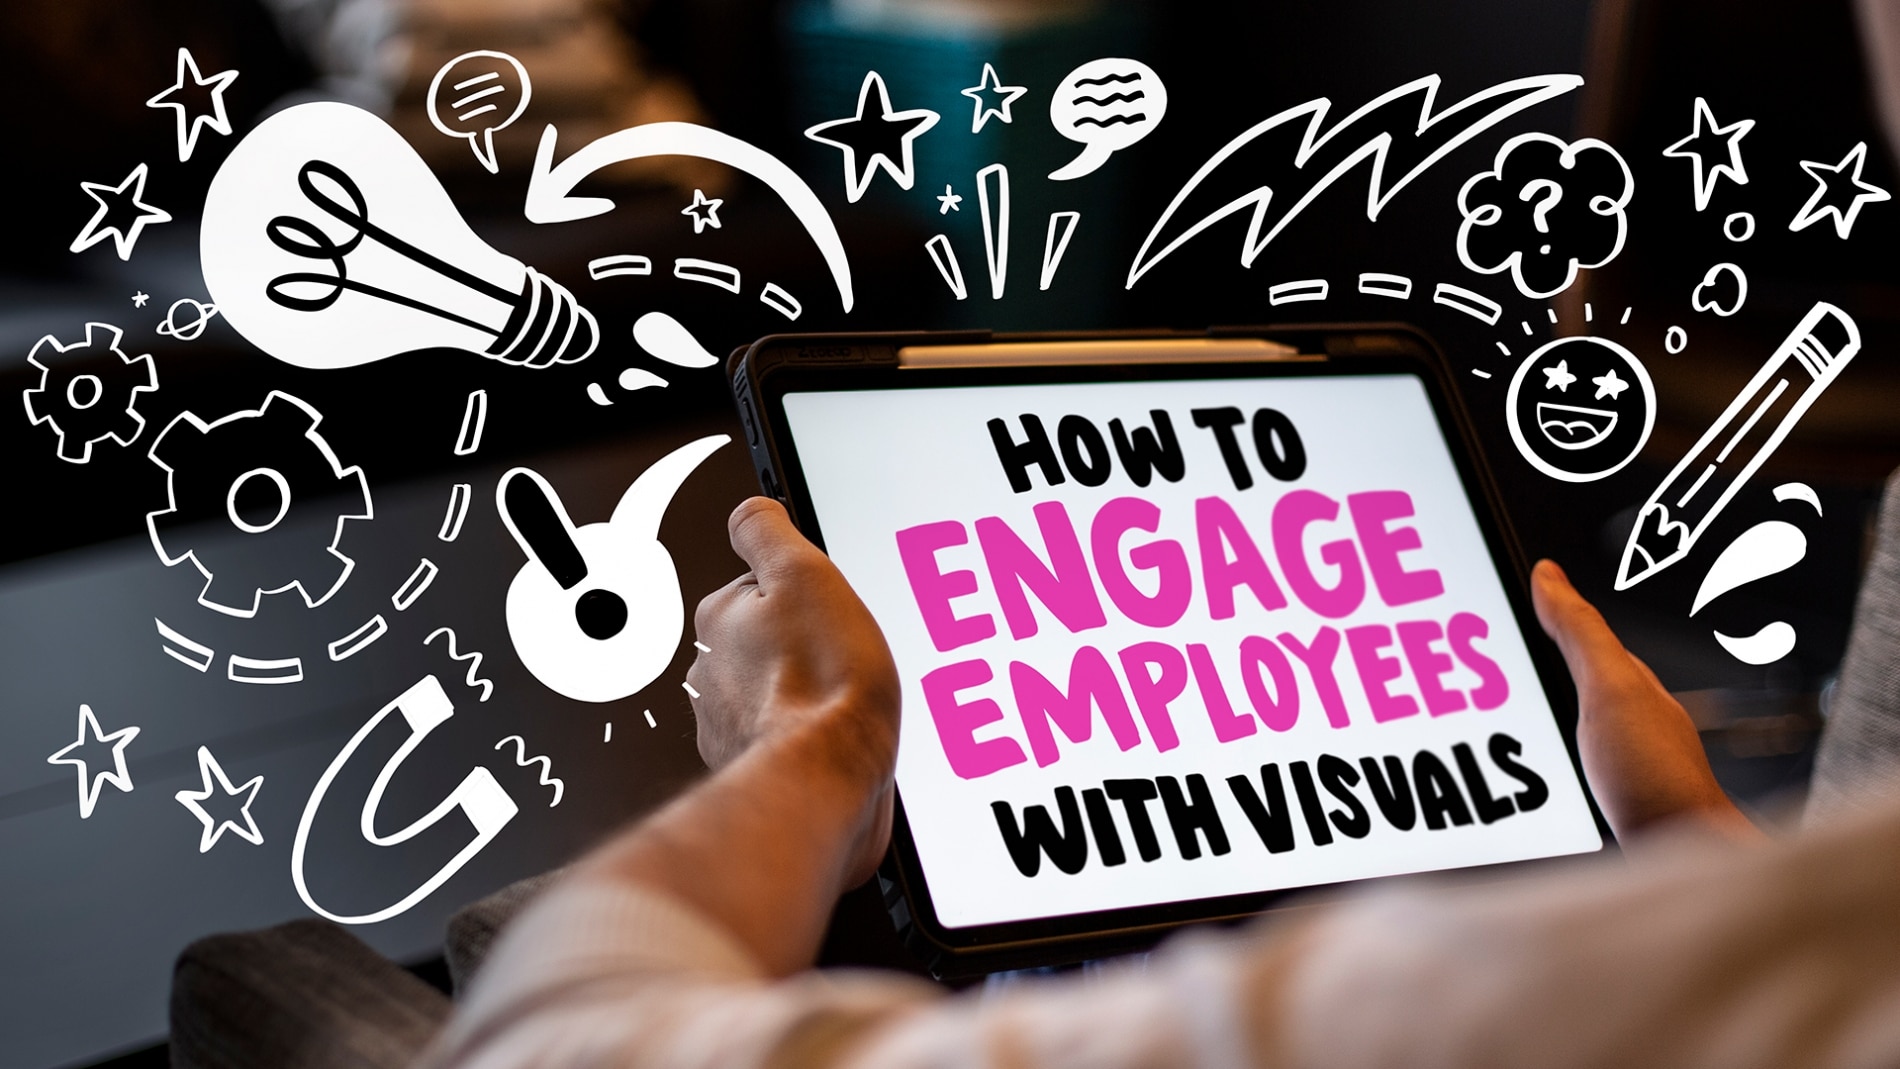 How to Engage Employees With Visuals